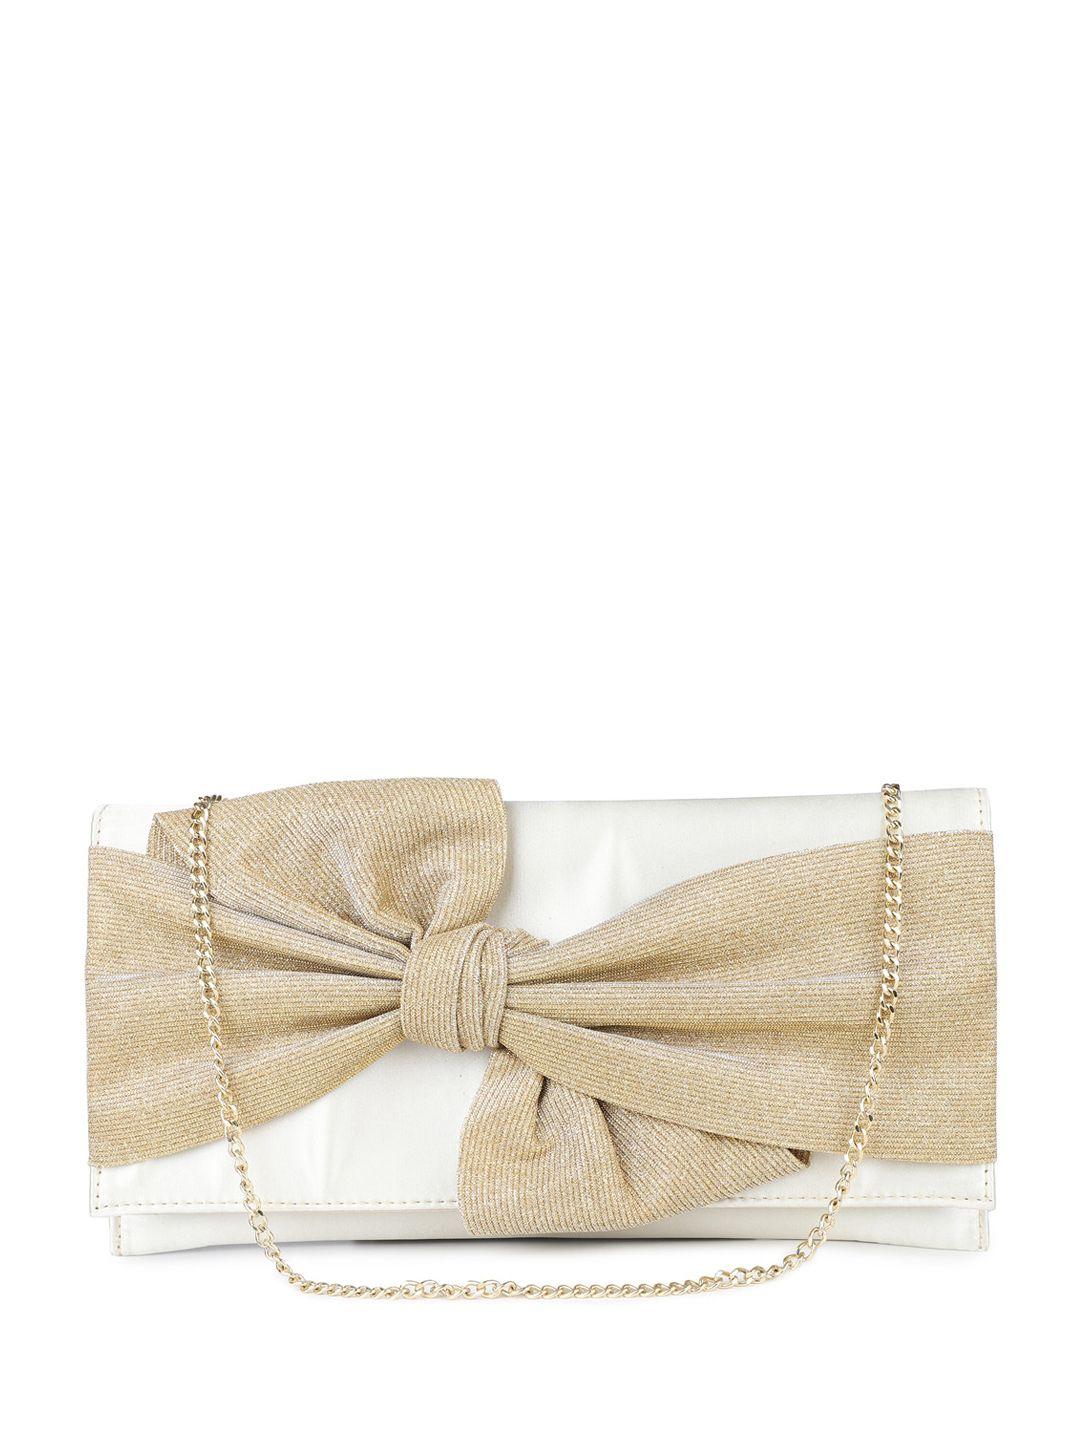 inc 5 gold-toned embellished clutches with bow frame